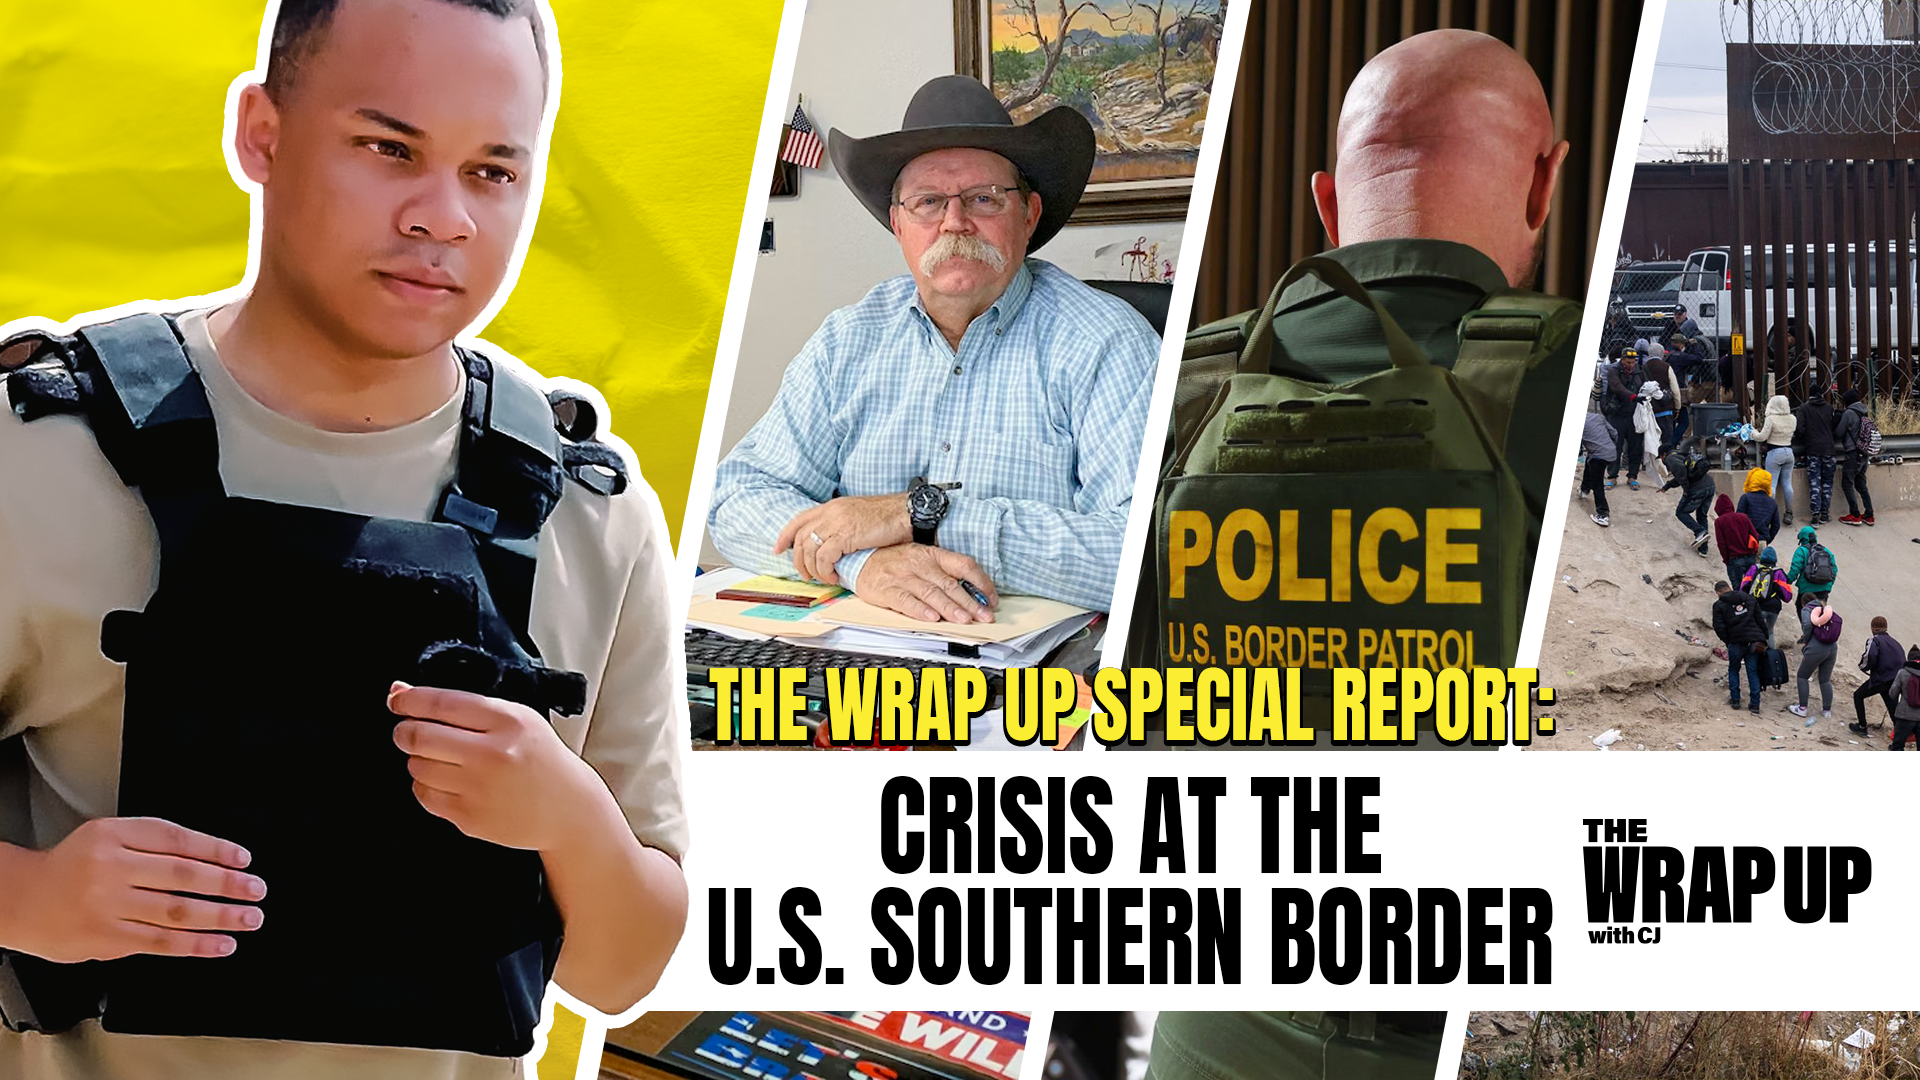 The Wrap Up Special Report: Crisis at the U.S. Southern Border